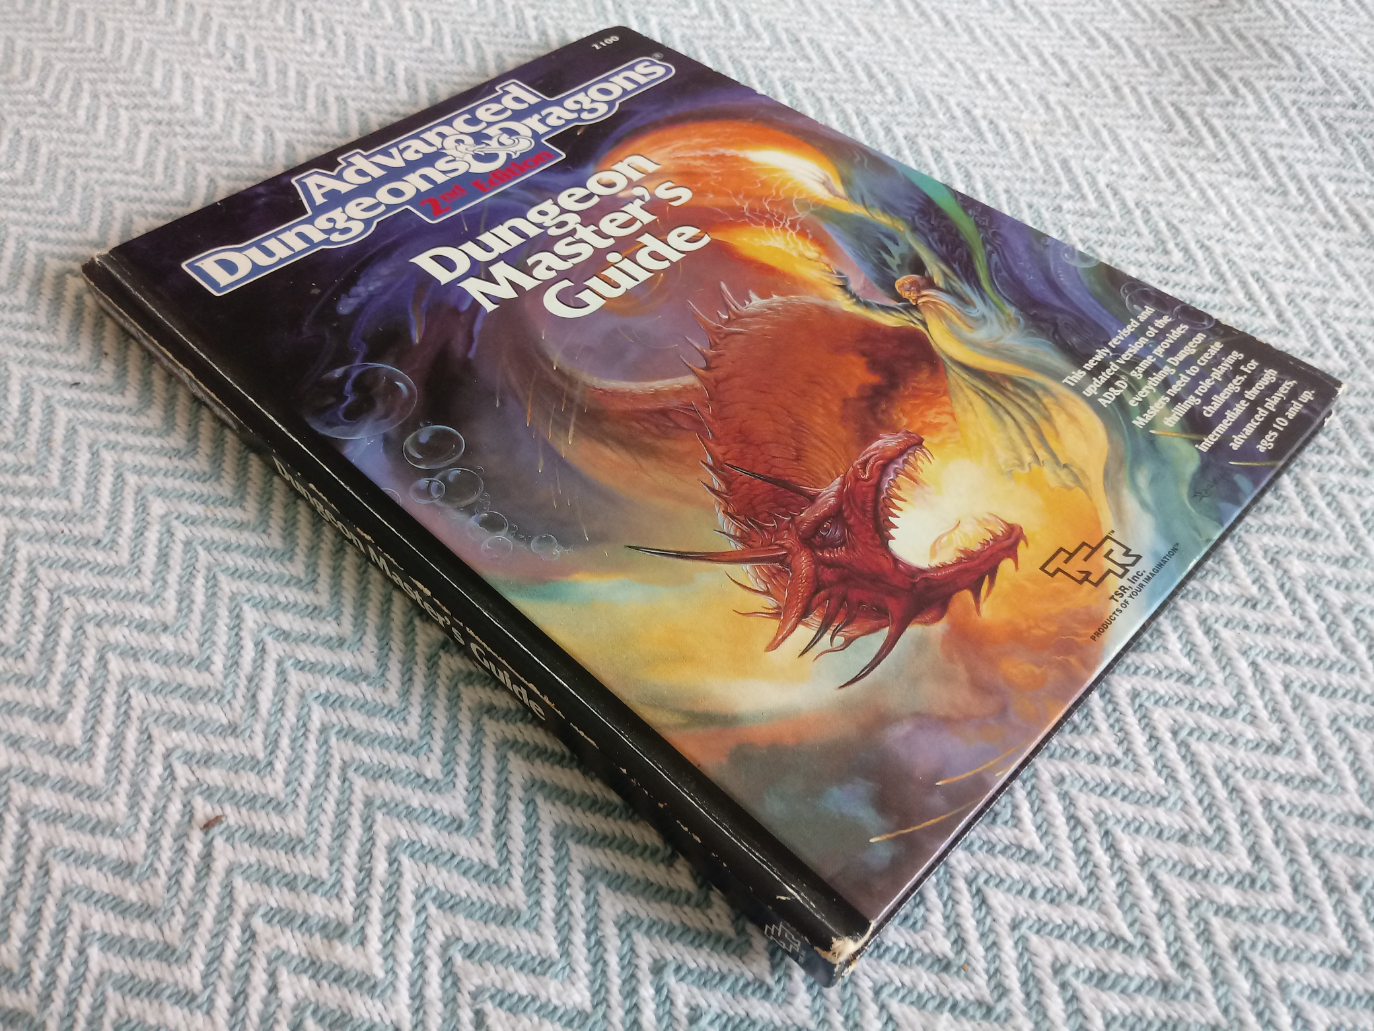 Advanced Dungeons and Dragons 2nd Edition Dungeon Master's Guide hardback book 192 pages Published